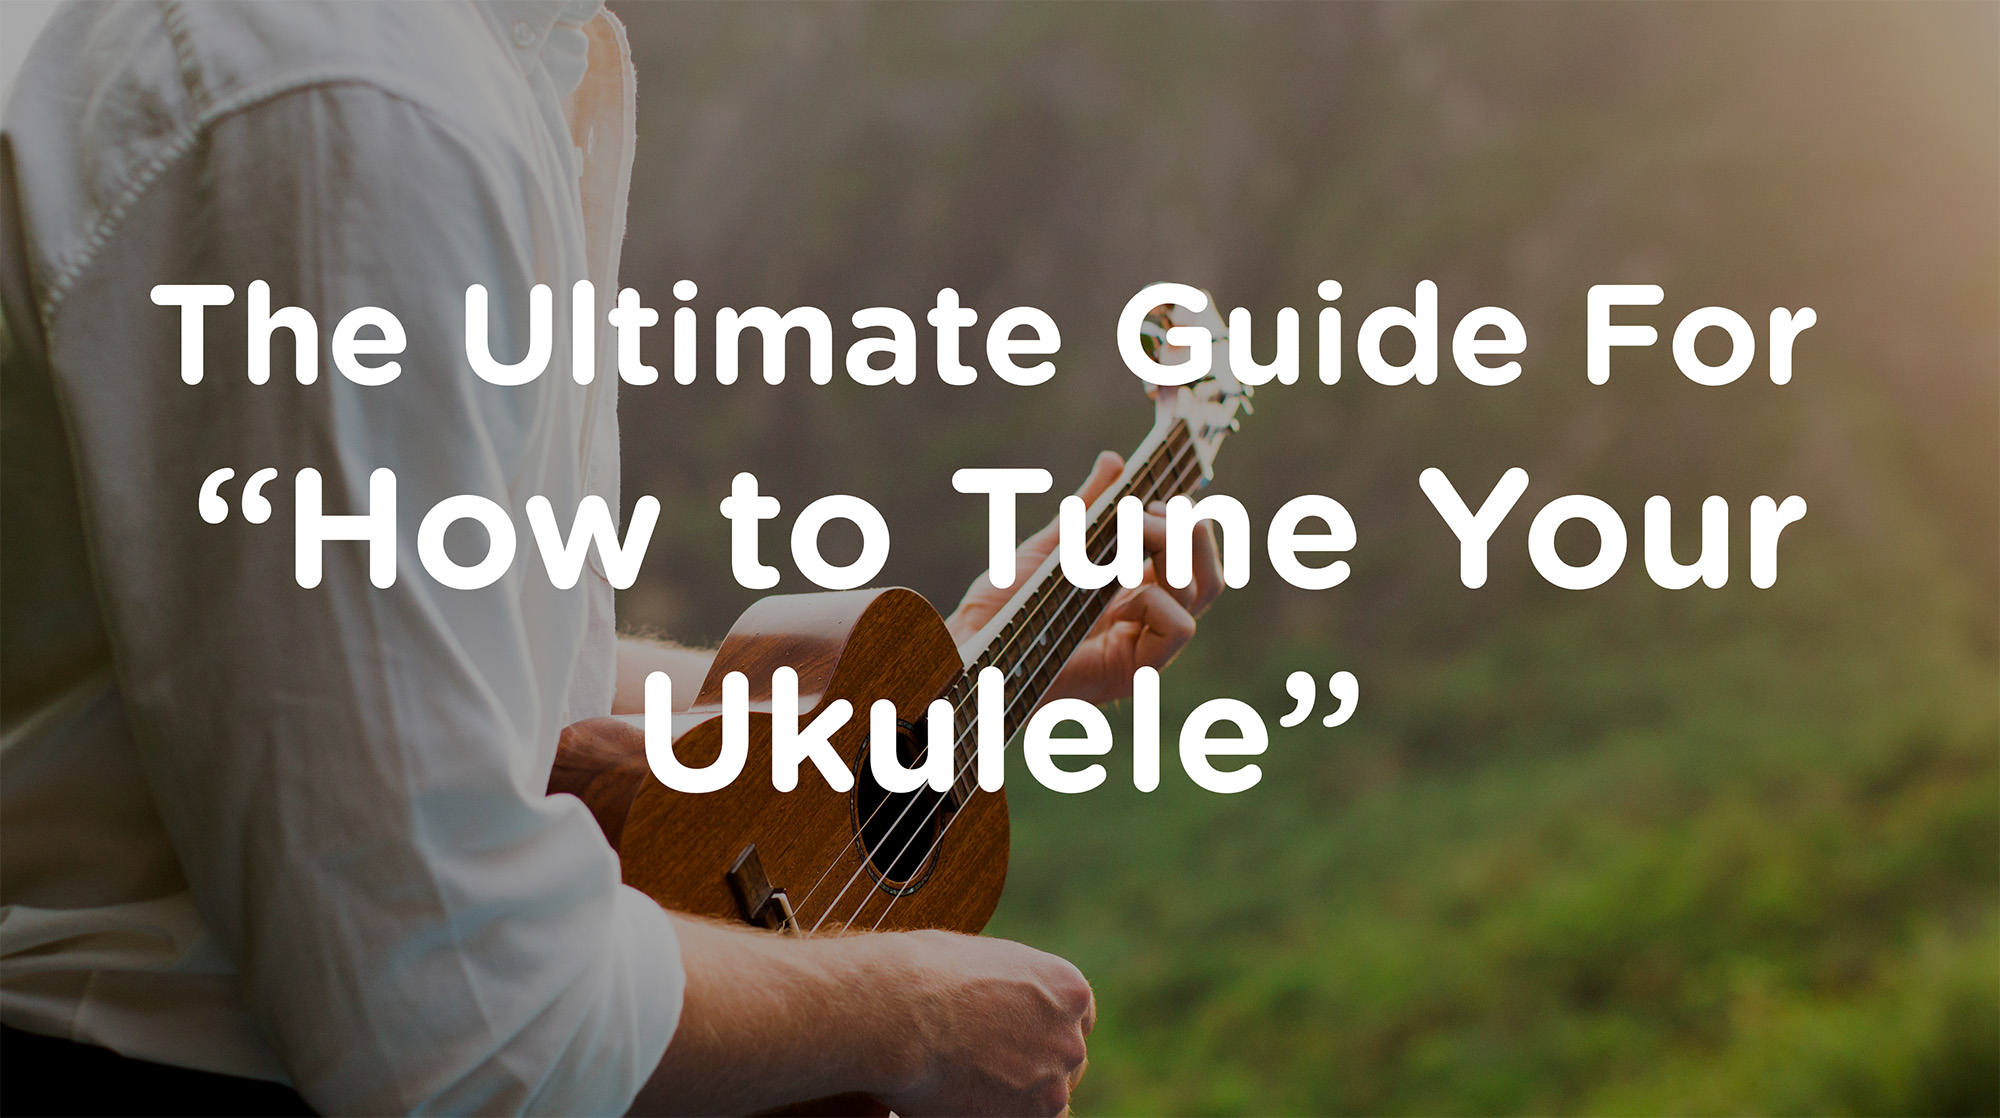 Ukulele Tuning The Ultimate Guide For How to Tune Your Ukulele